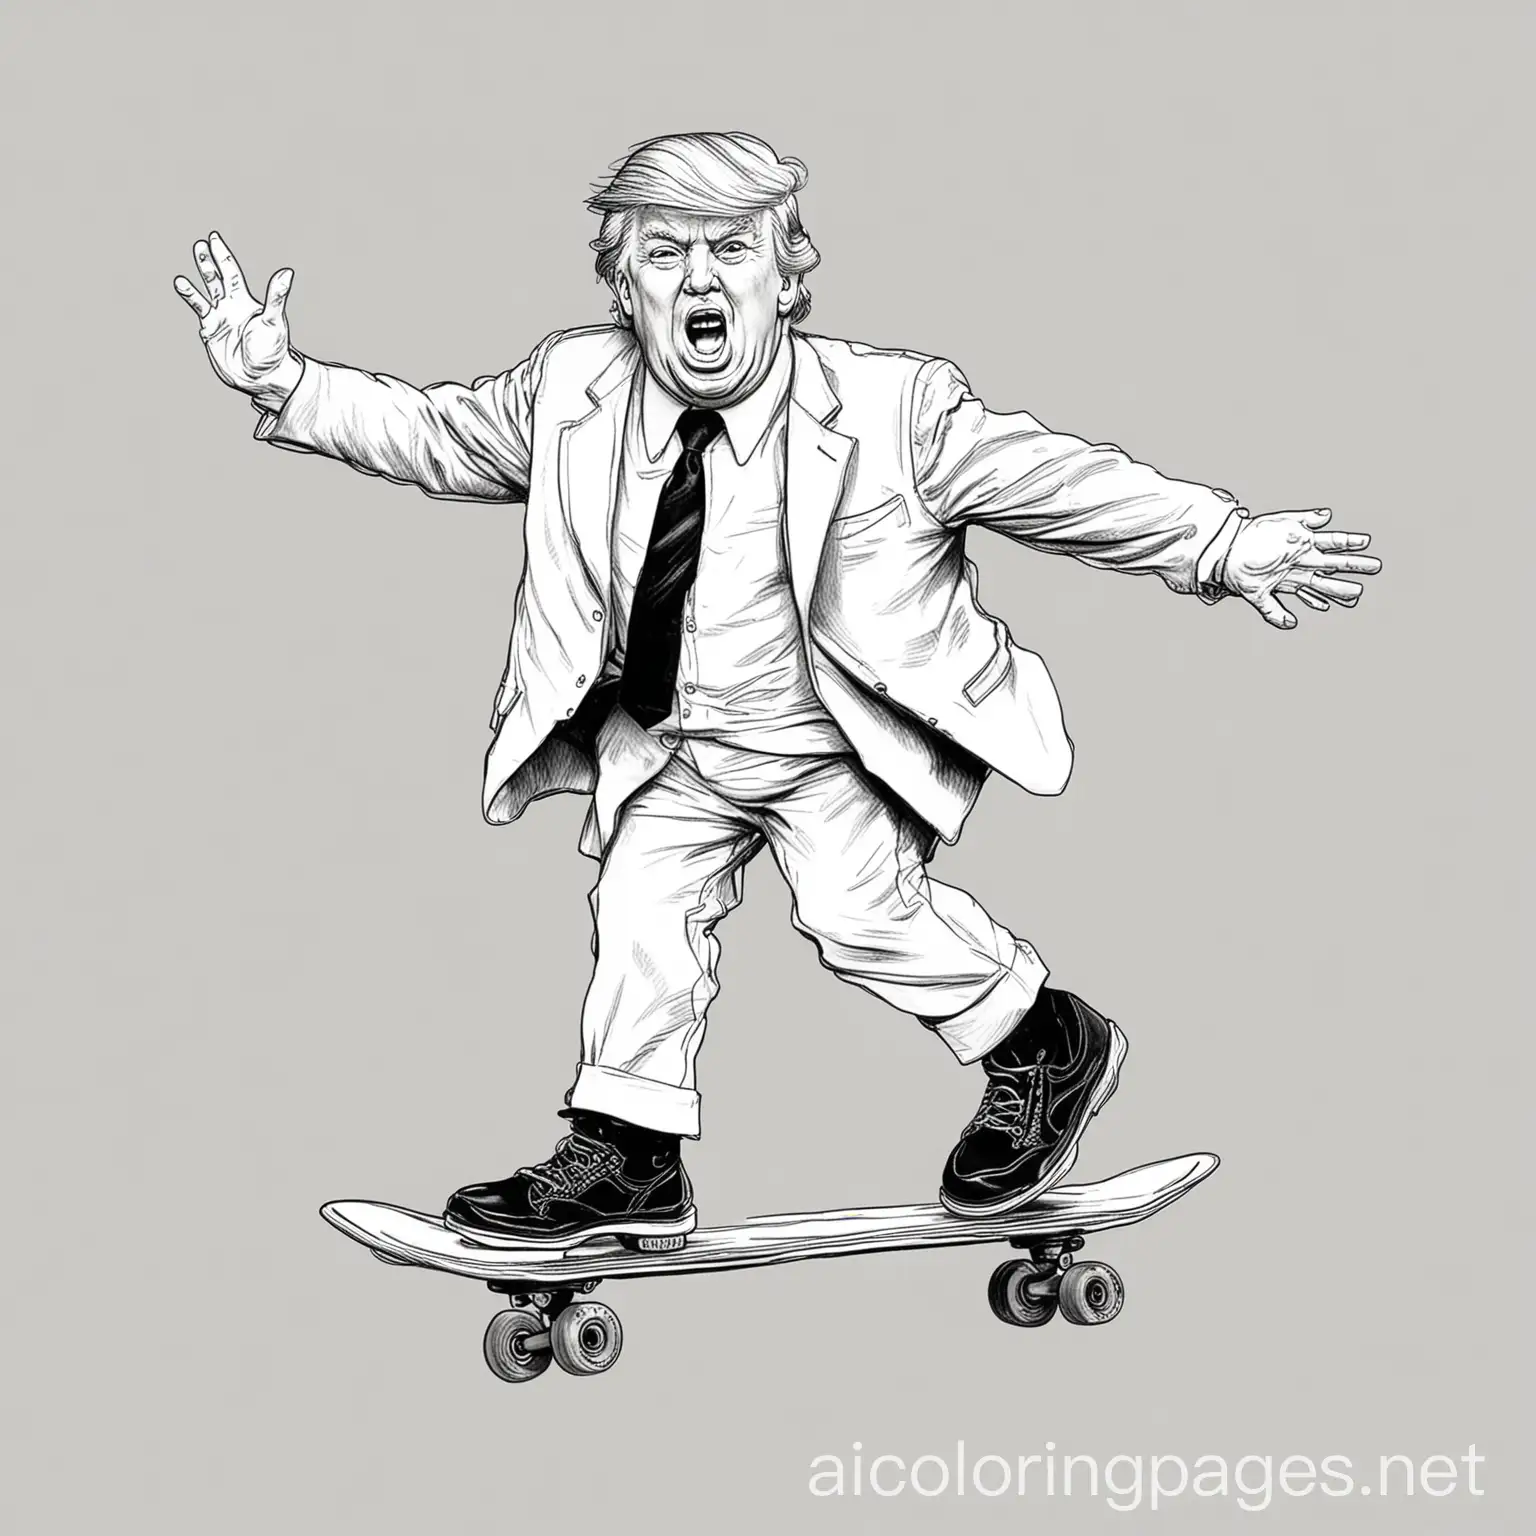 Donald-Trump-Skateboarding-Coloring-Page